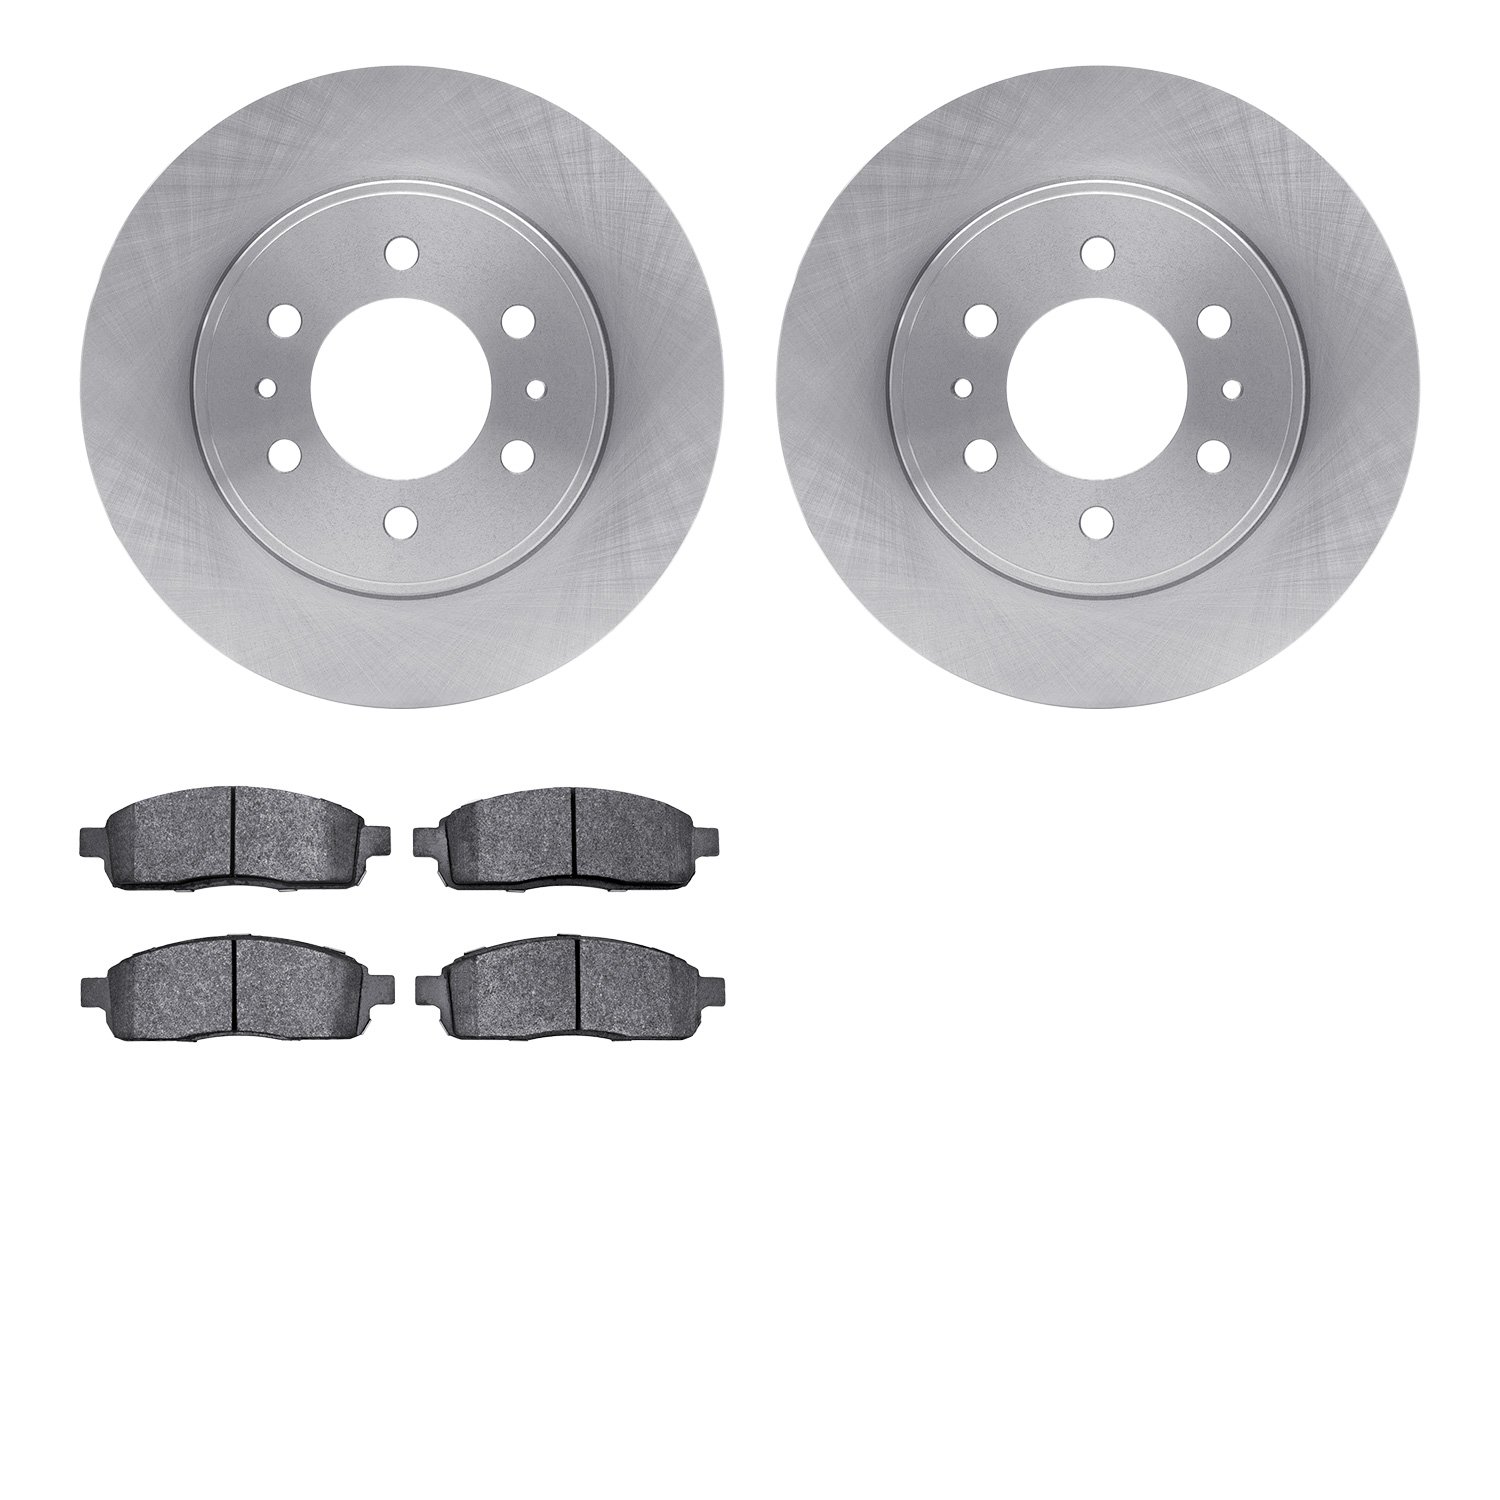 6402-54275 Brake Rotors with Ultimate-Duty Brake Pads, 2009-2009 Ford/Lincoln/Mercury/Mazda, Position: Front